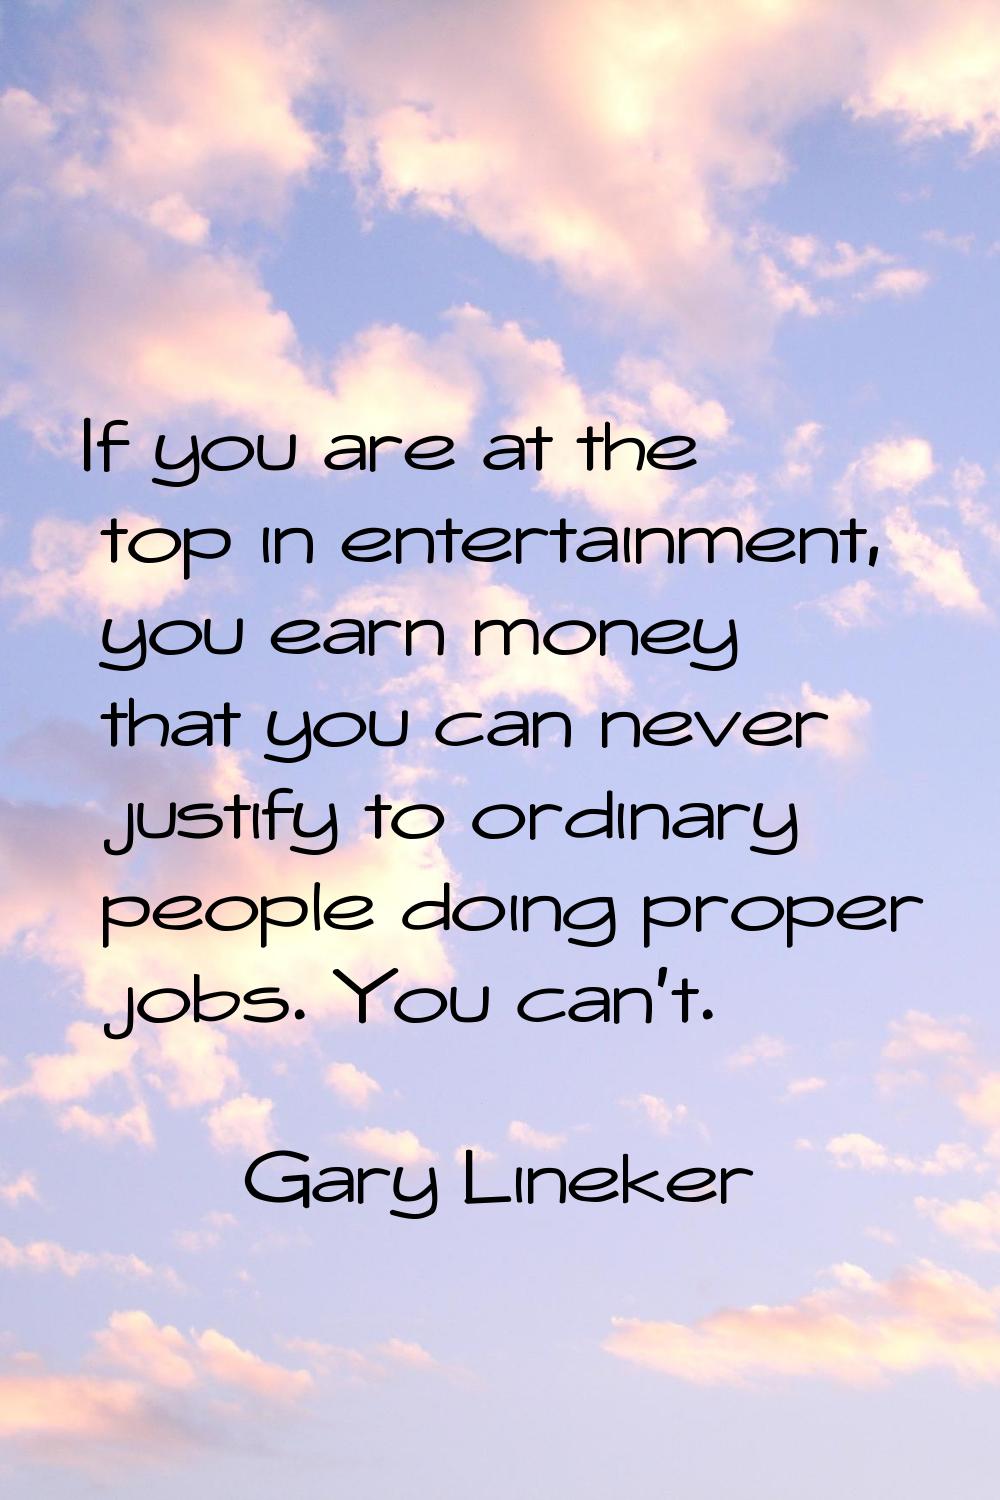 If you are at the top in entertainment, you earn money that you can never justify to ordinary peopl